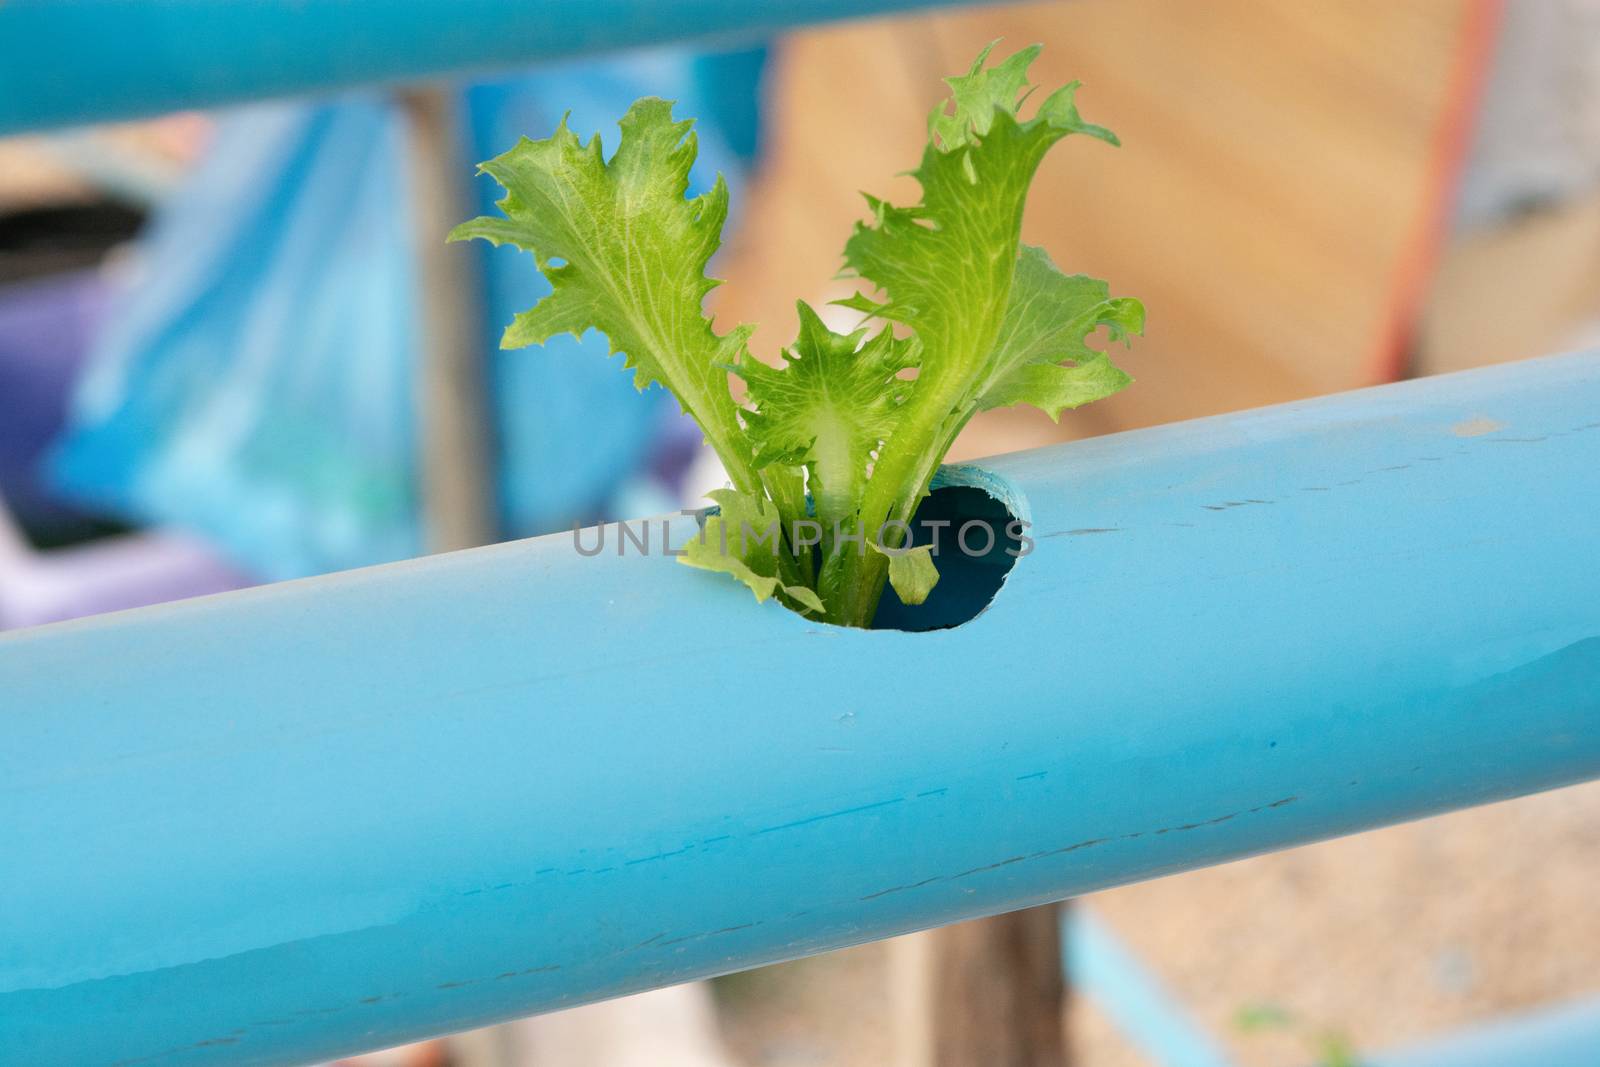 Hydroponic vegetables growing in Pvc pipe
 by sunnygb5